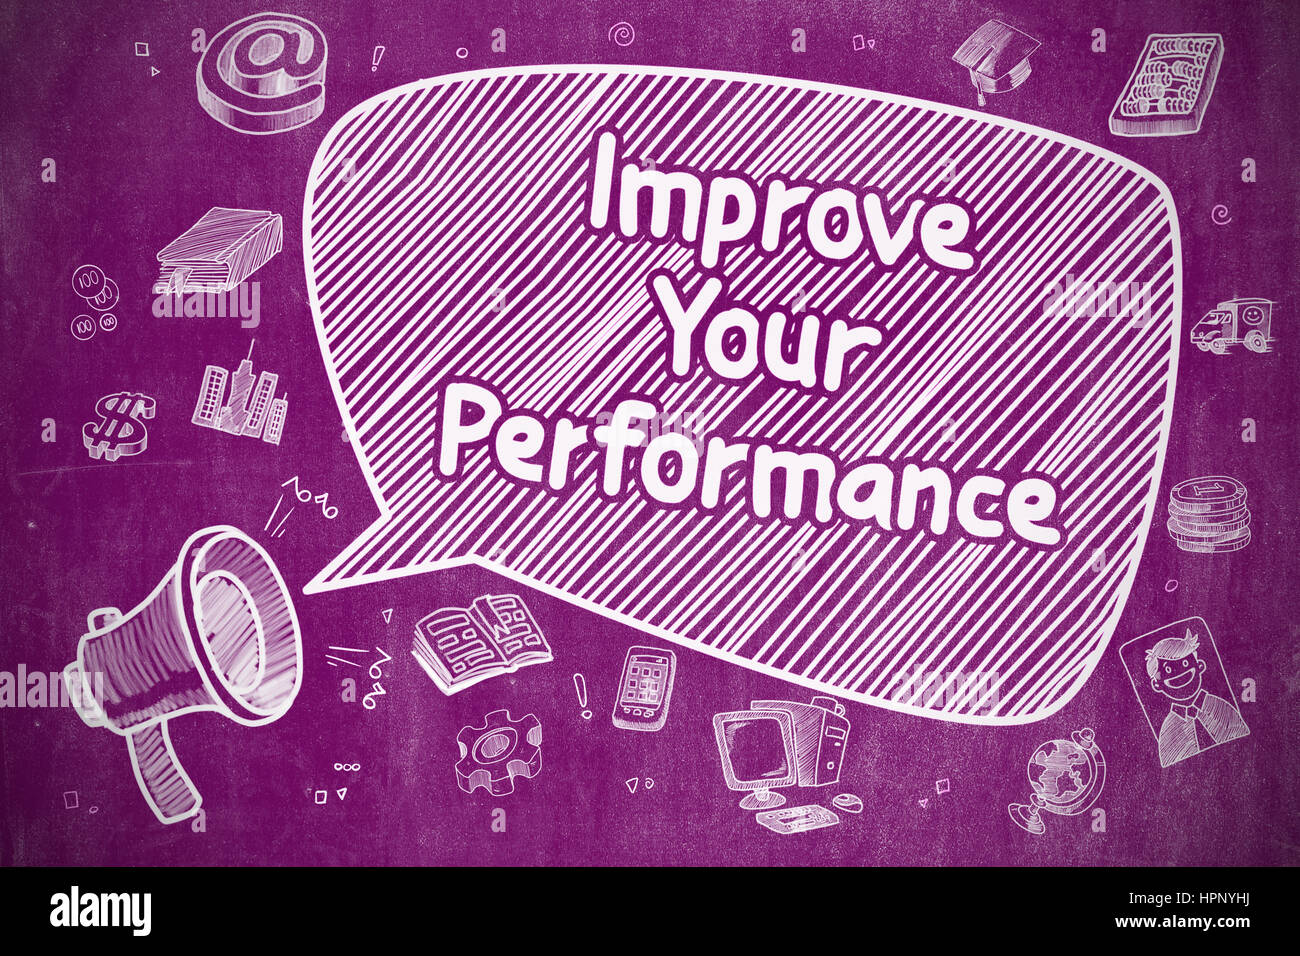 Improve Your Performance - Business Concept. Stock Photo